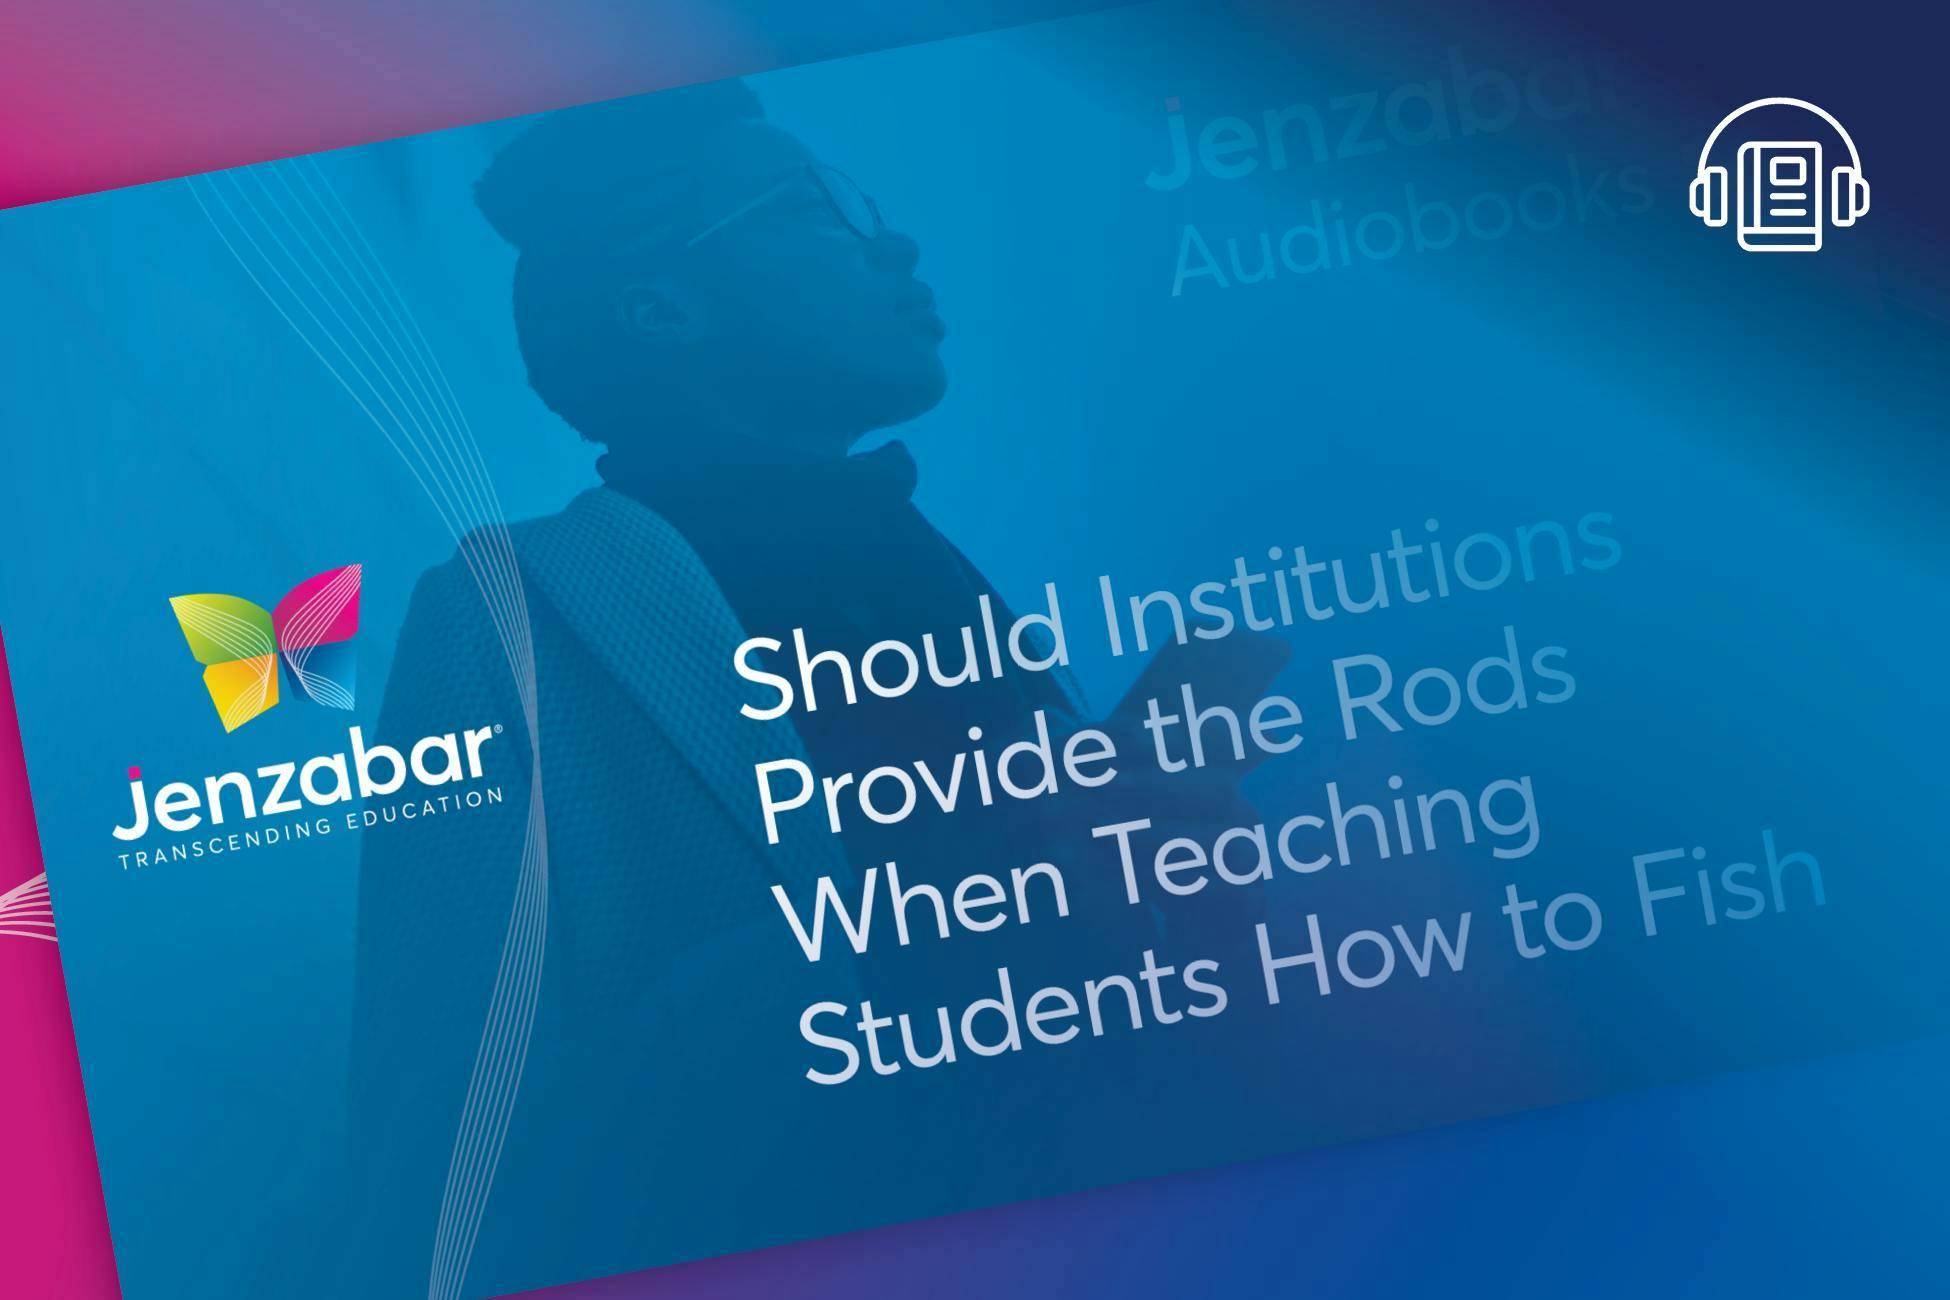 Audiobook: Should Institutions Provide the Rods When Teaching Students How to Fish?